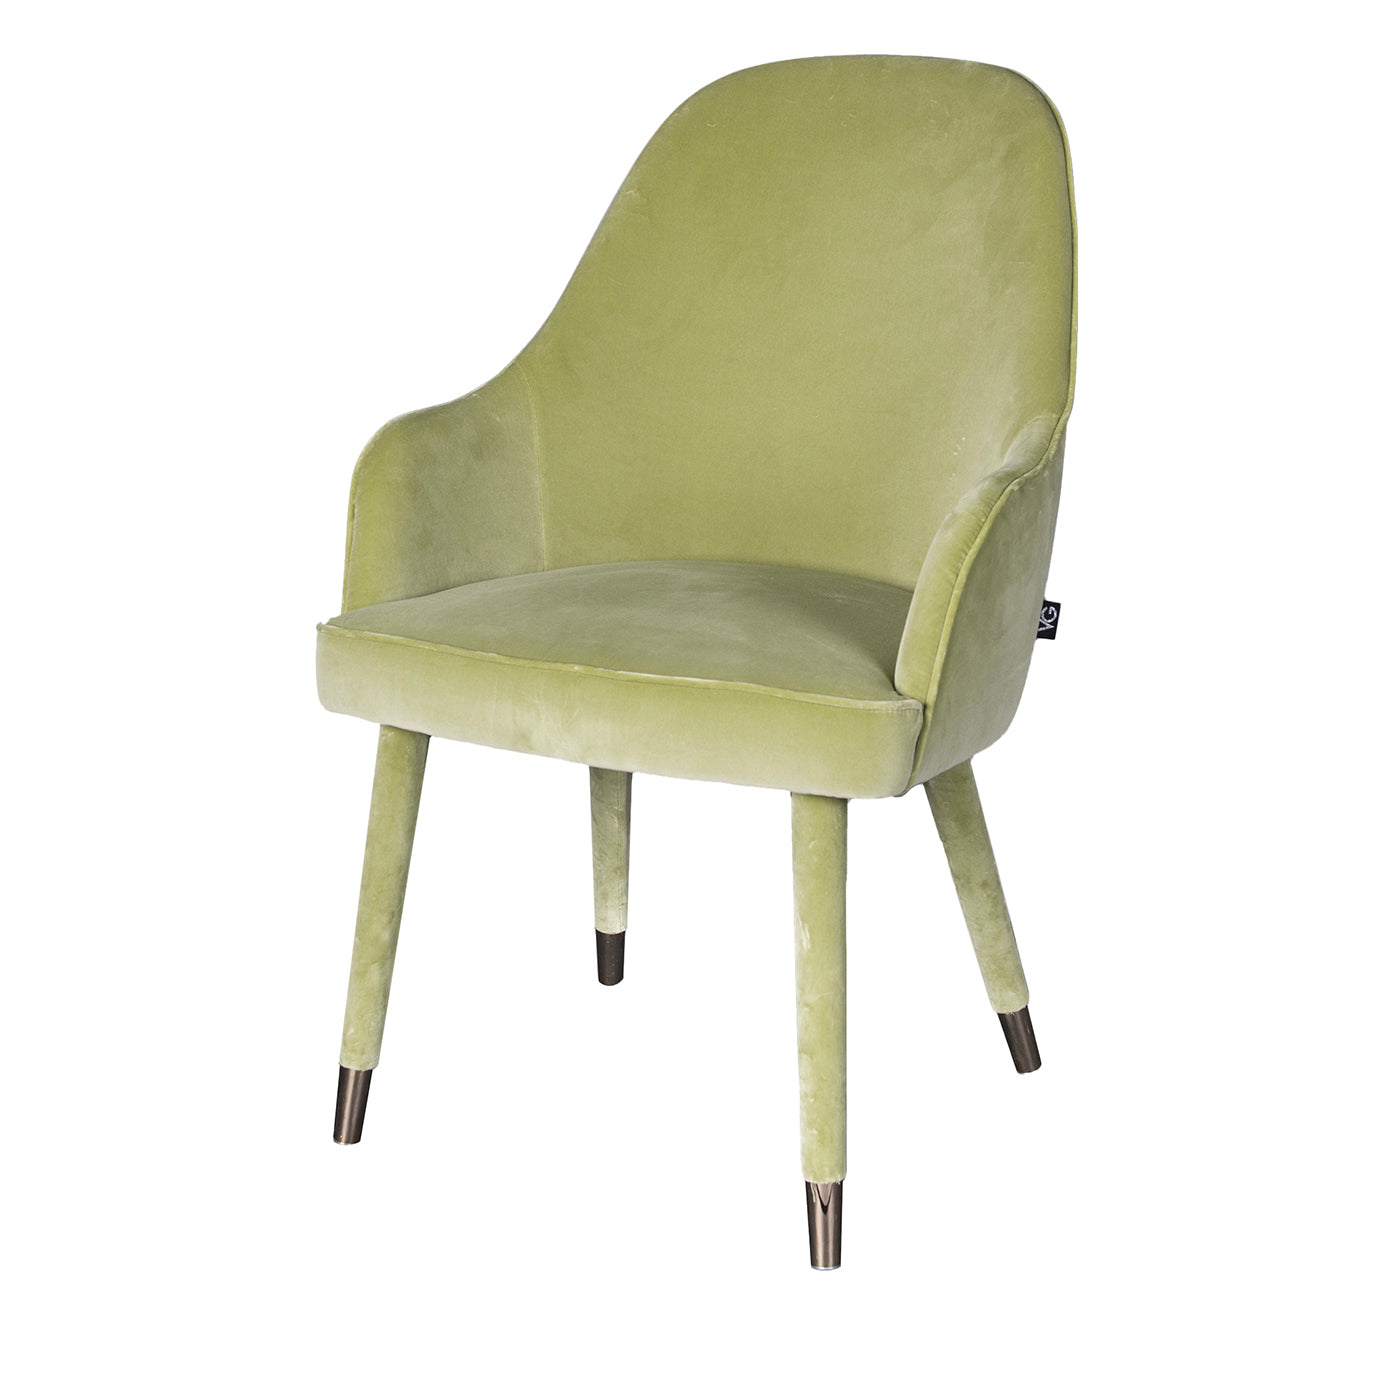 Paulette Chair with Armrests - Main view